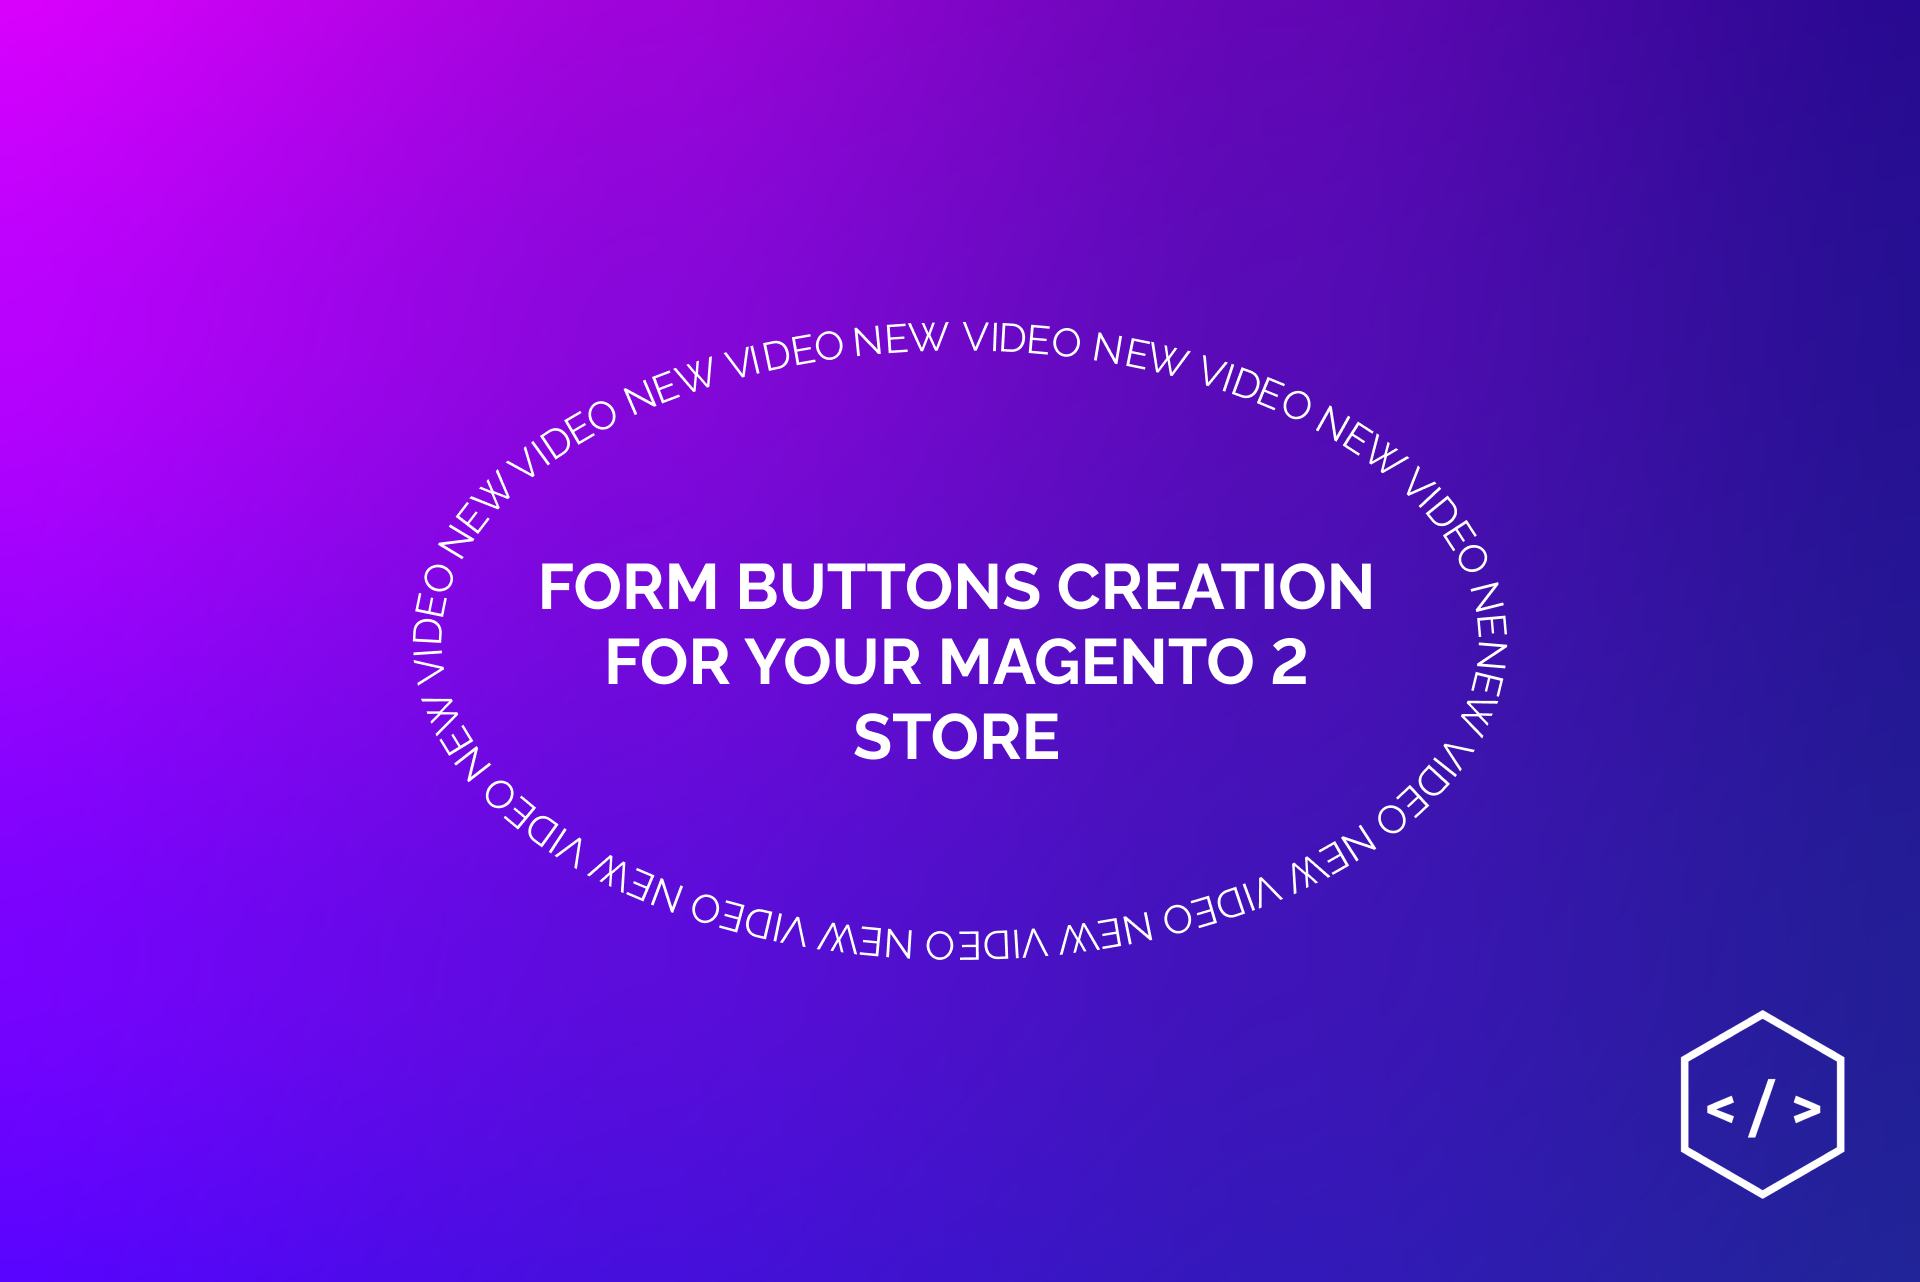 How to create Form Buttons?